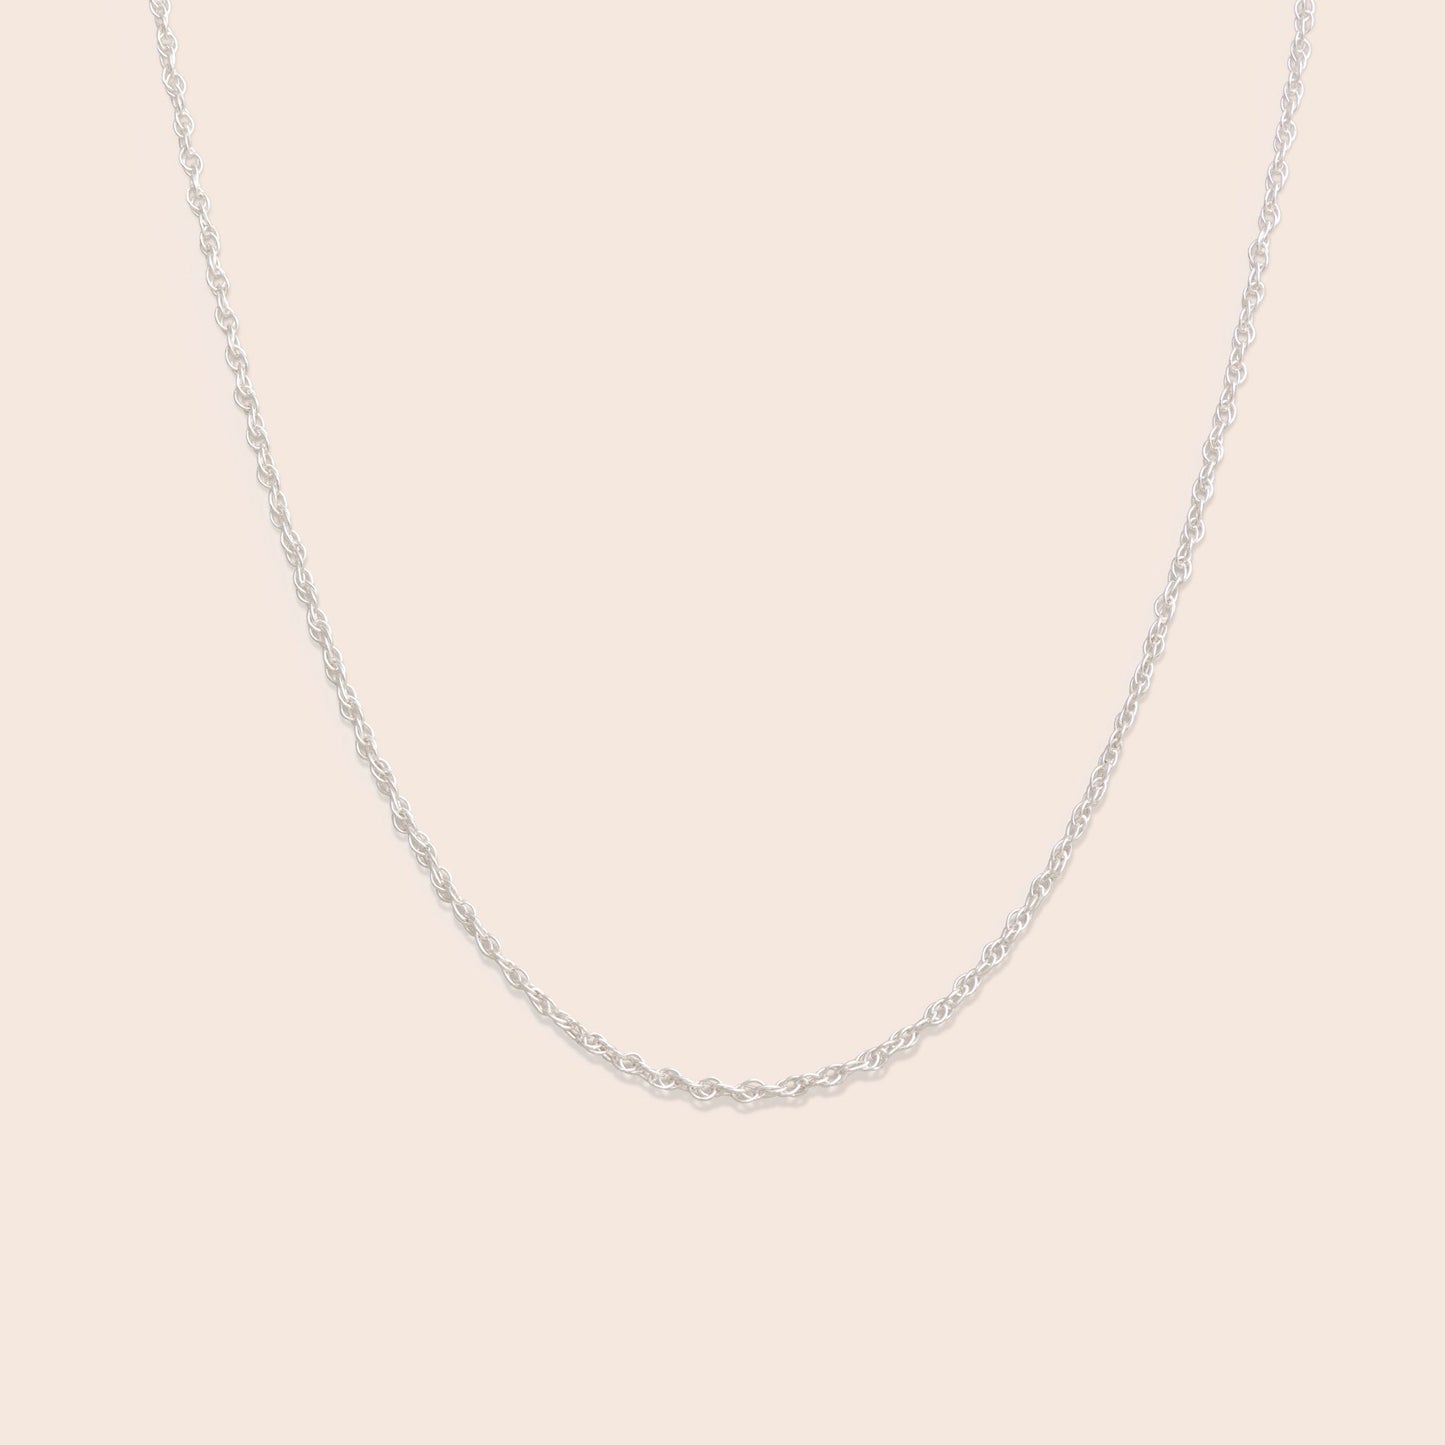 Silver Rope Chain Necklace - Gemlet